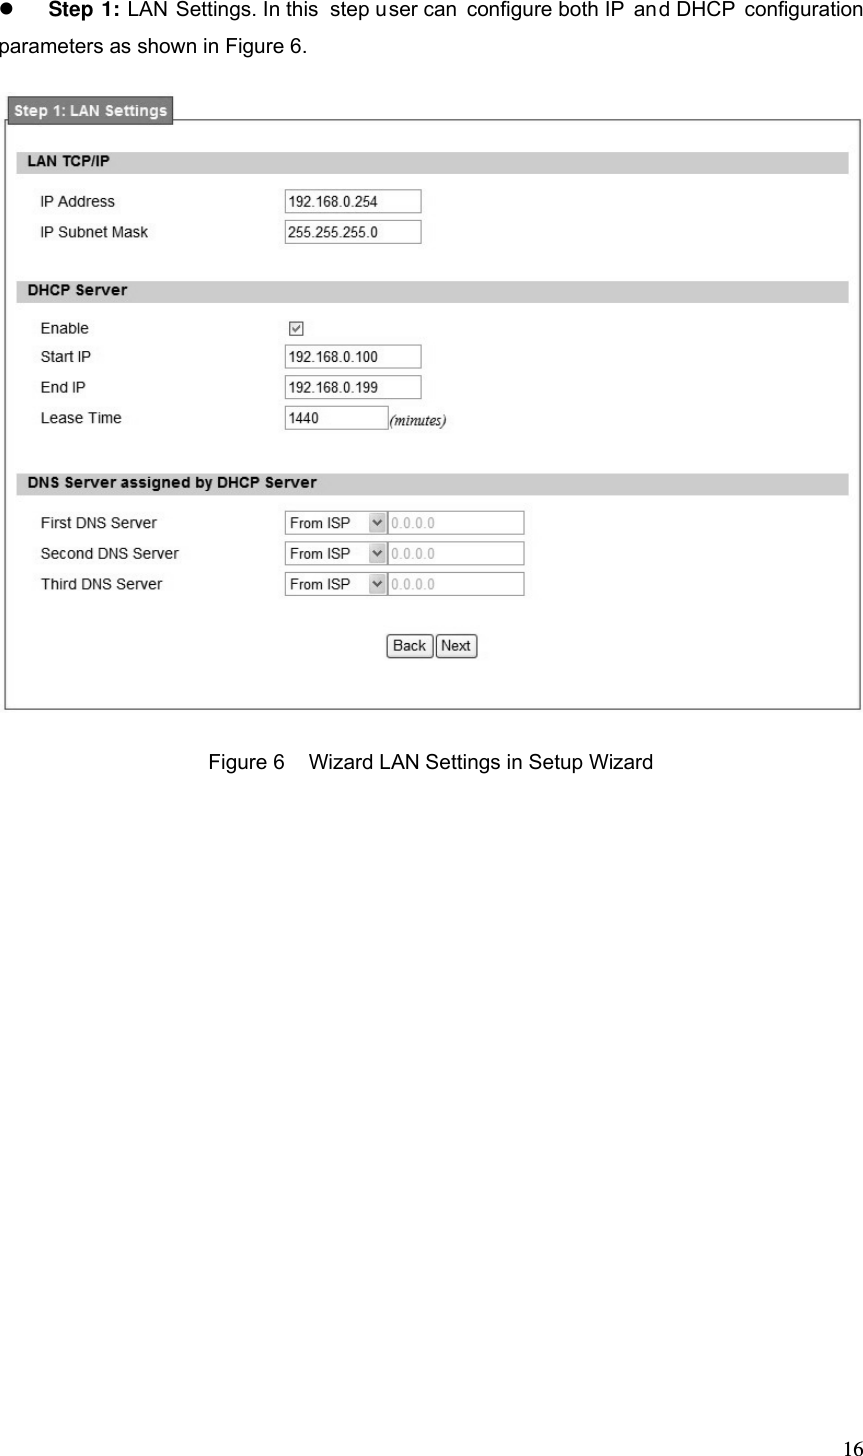  16 Step 1: LAN Settings. In this  step user can configure both IP  and DHCP configuration parameters as shown in Figure 6.  Figure 6  Wizard LAN Settings in Setup Wizard 